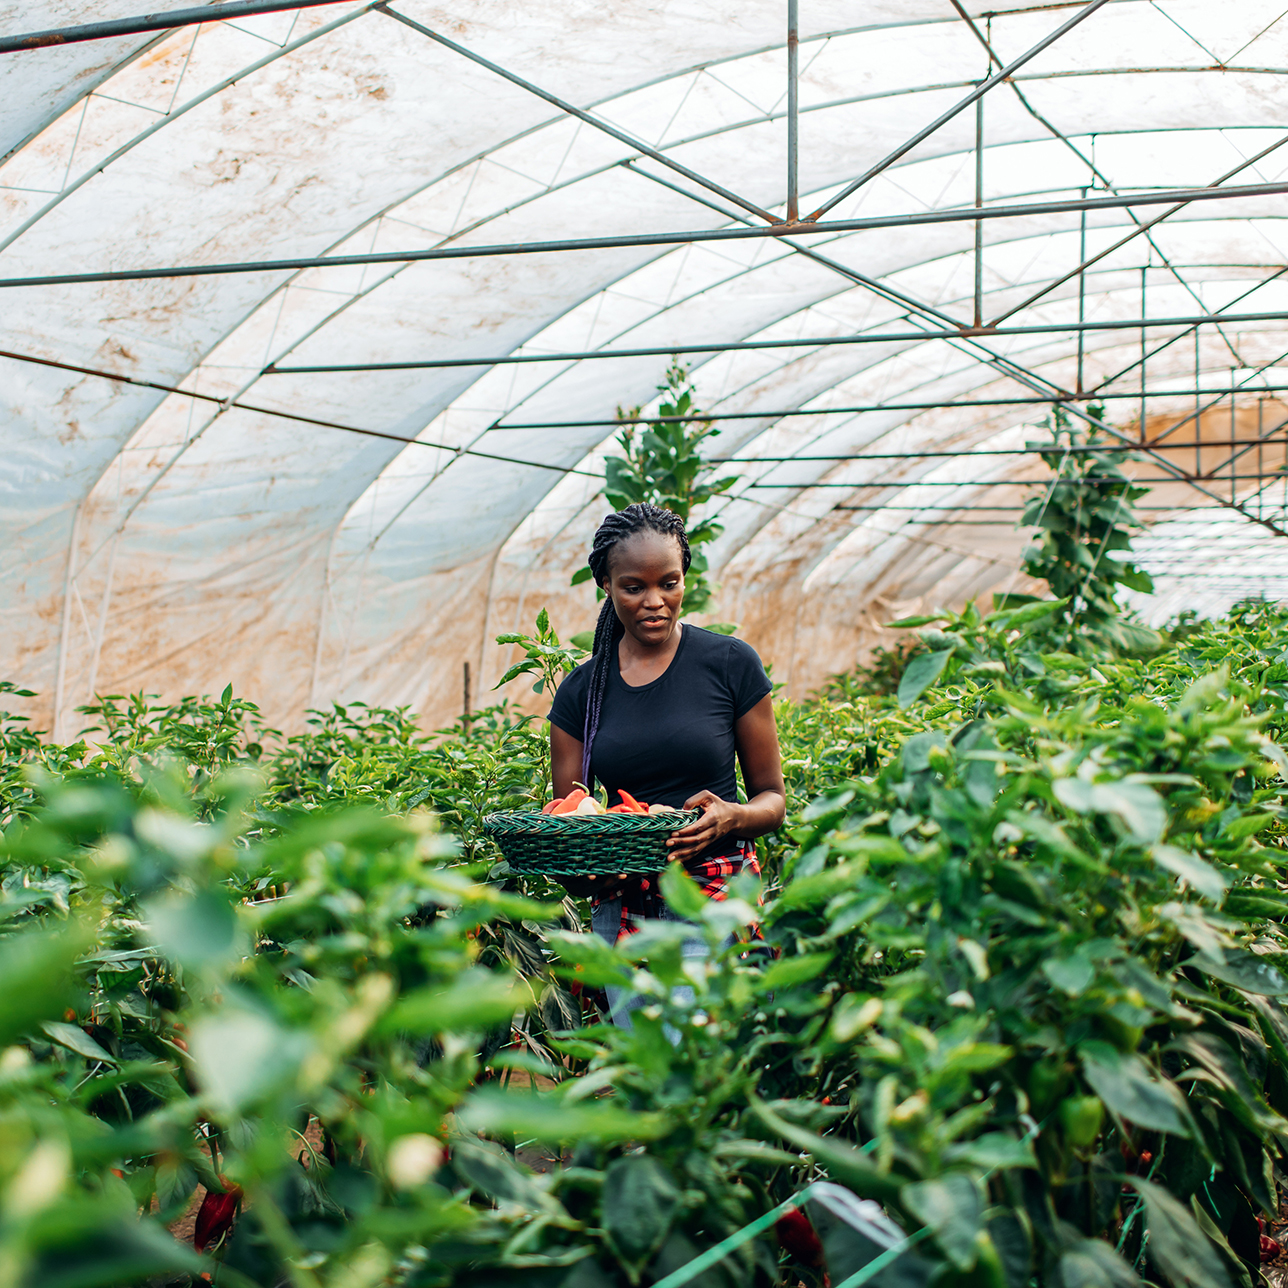 A woman gathering fruits/vegetables in a large greenhouse